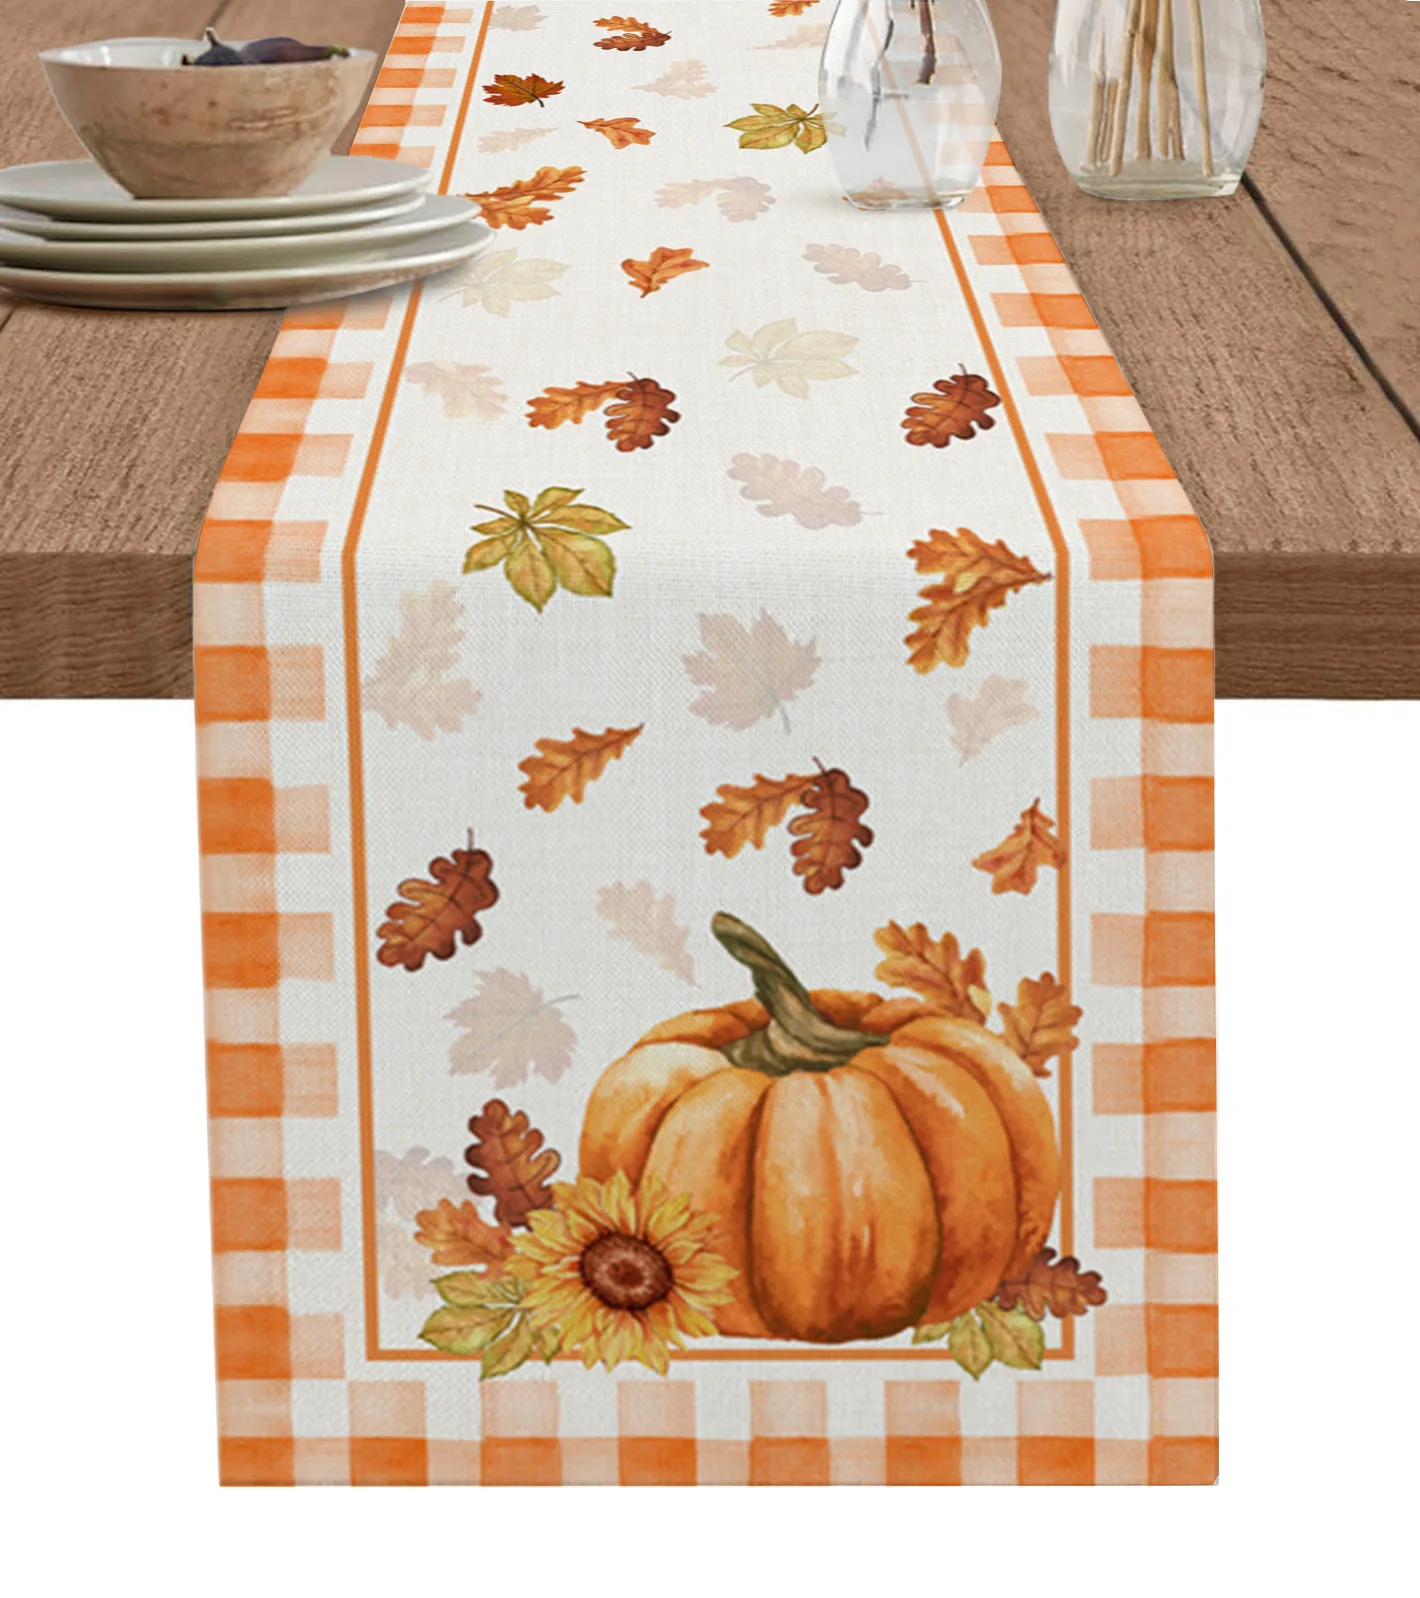 

Thanksgiving Pumpkin Maple Leaf Sunflower Plaid Table Runner Wedding Party Dining Table Cover Placemat Napkin Home Kitchen Decor